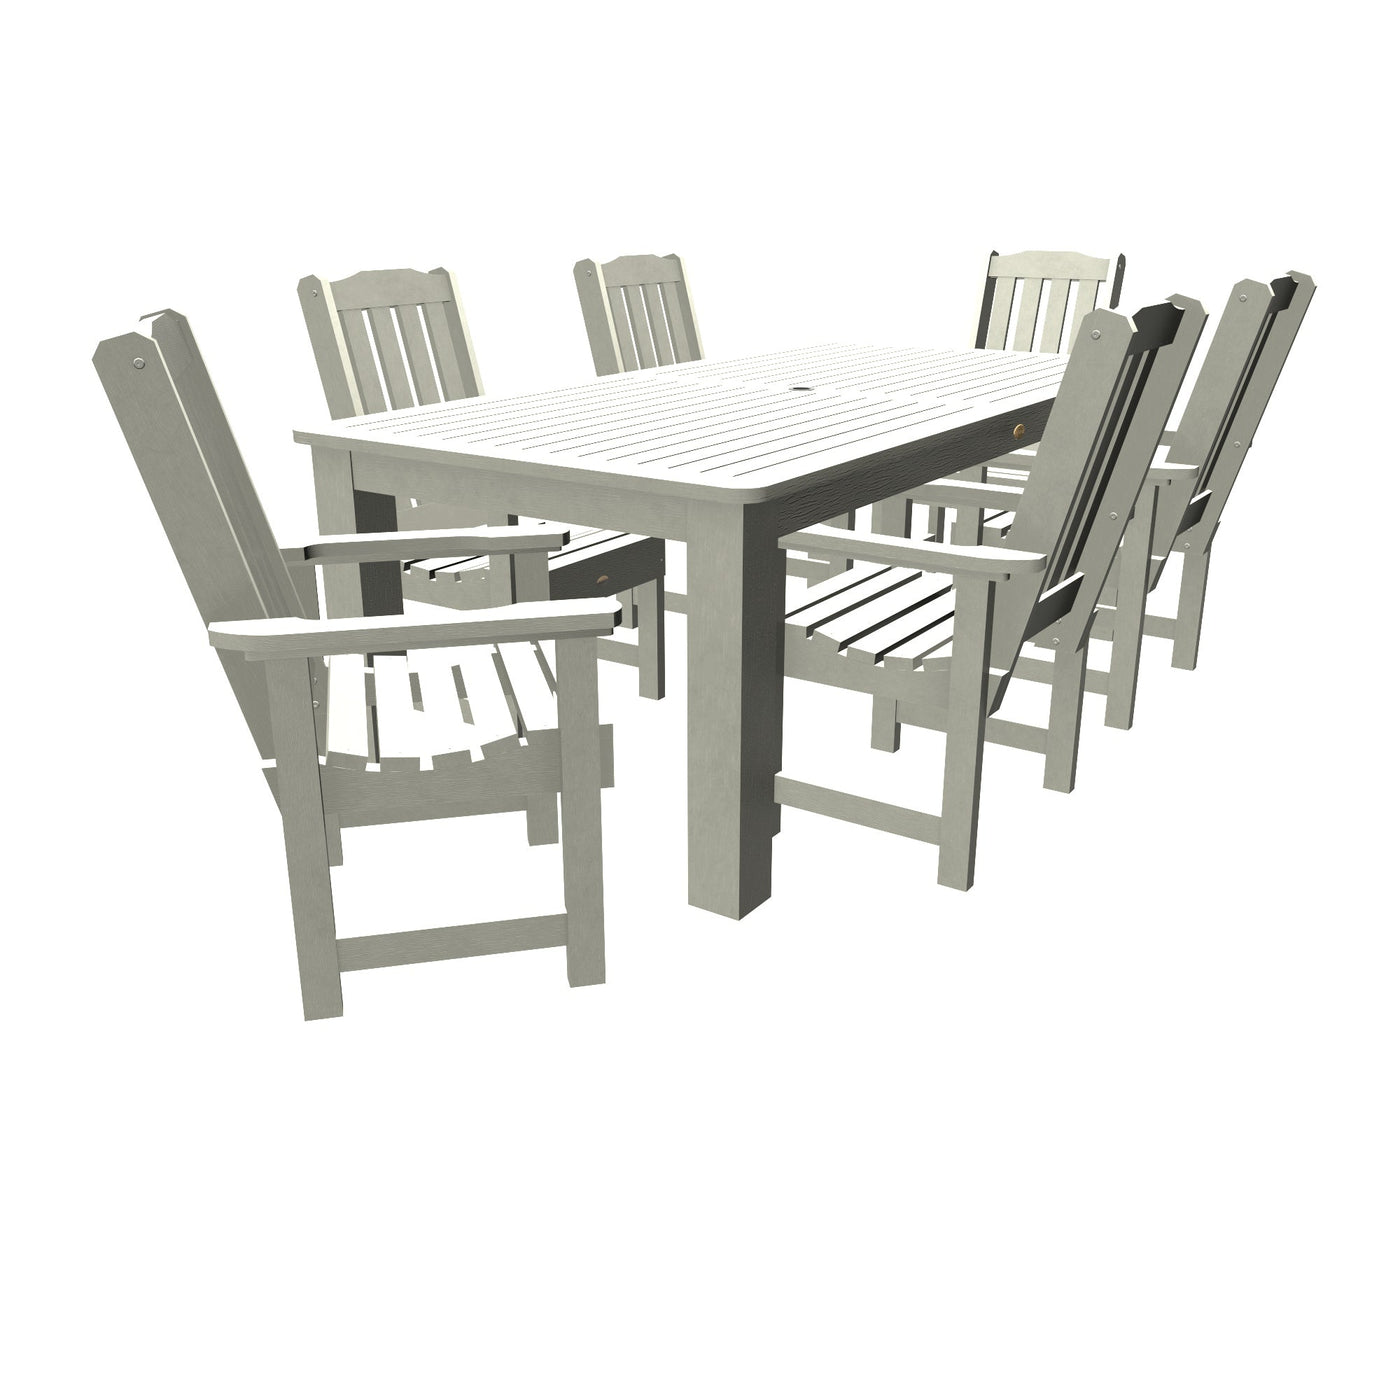 Lehigh 7pc Rectangular Outdoor Dining Set 42in x 84in - Dining Height Dining Highwood USA White 